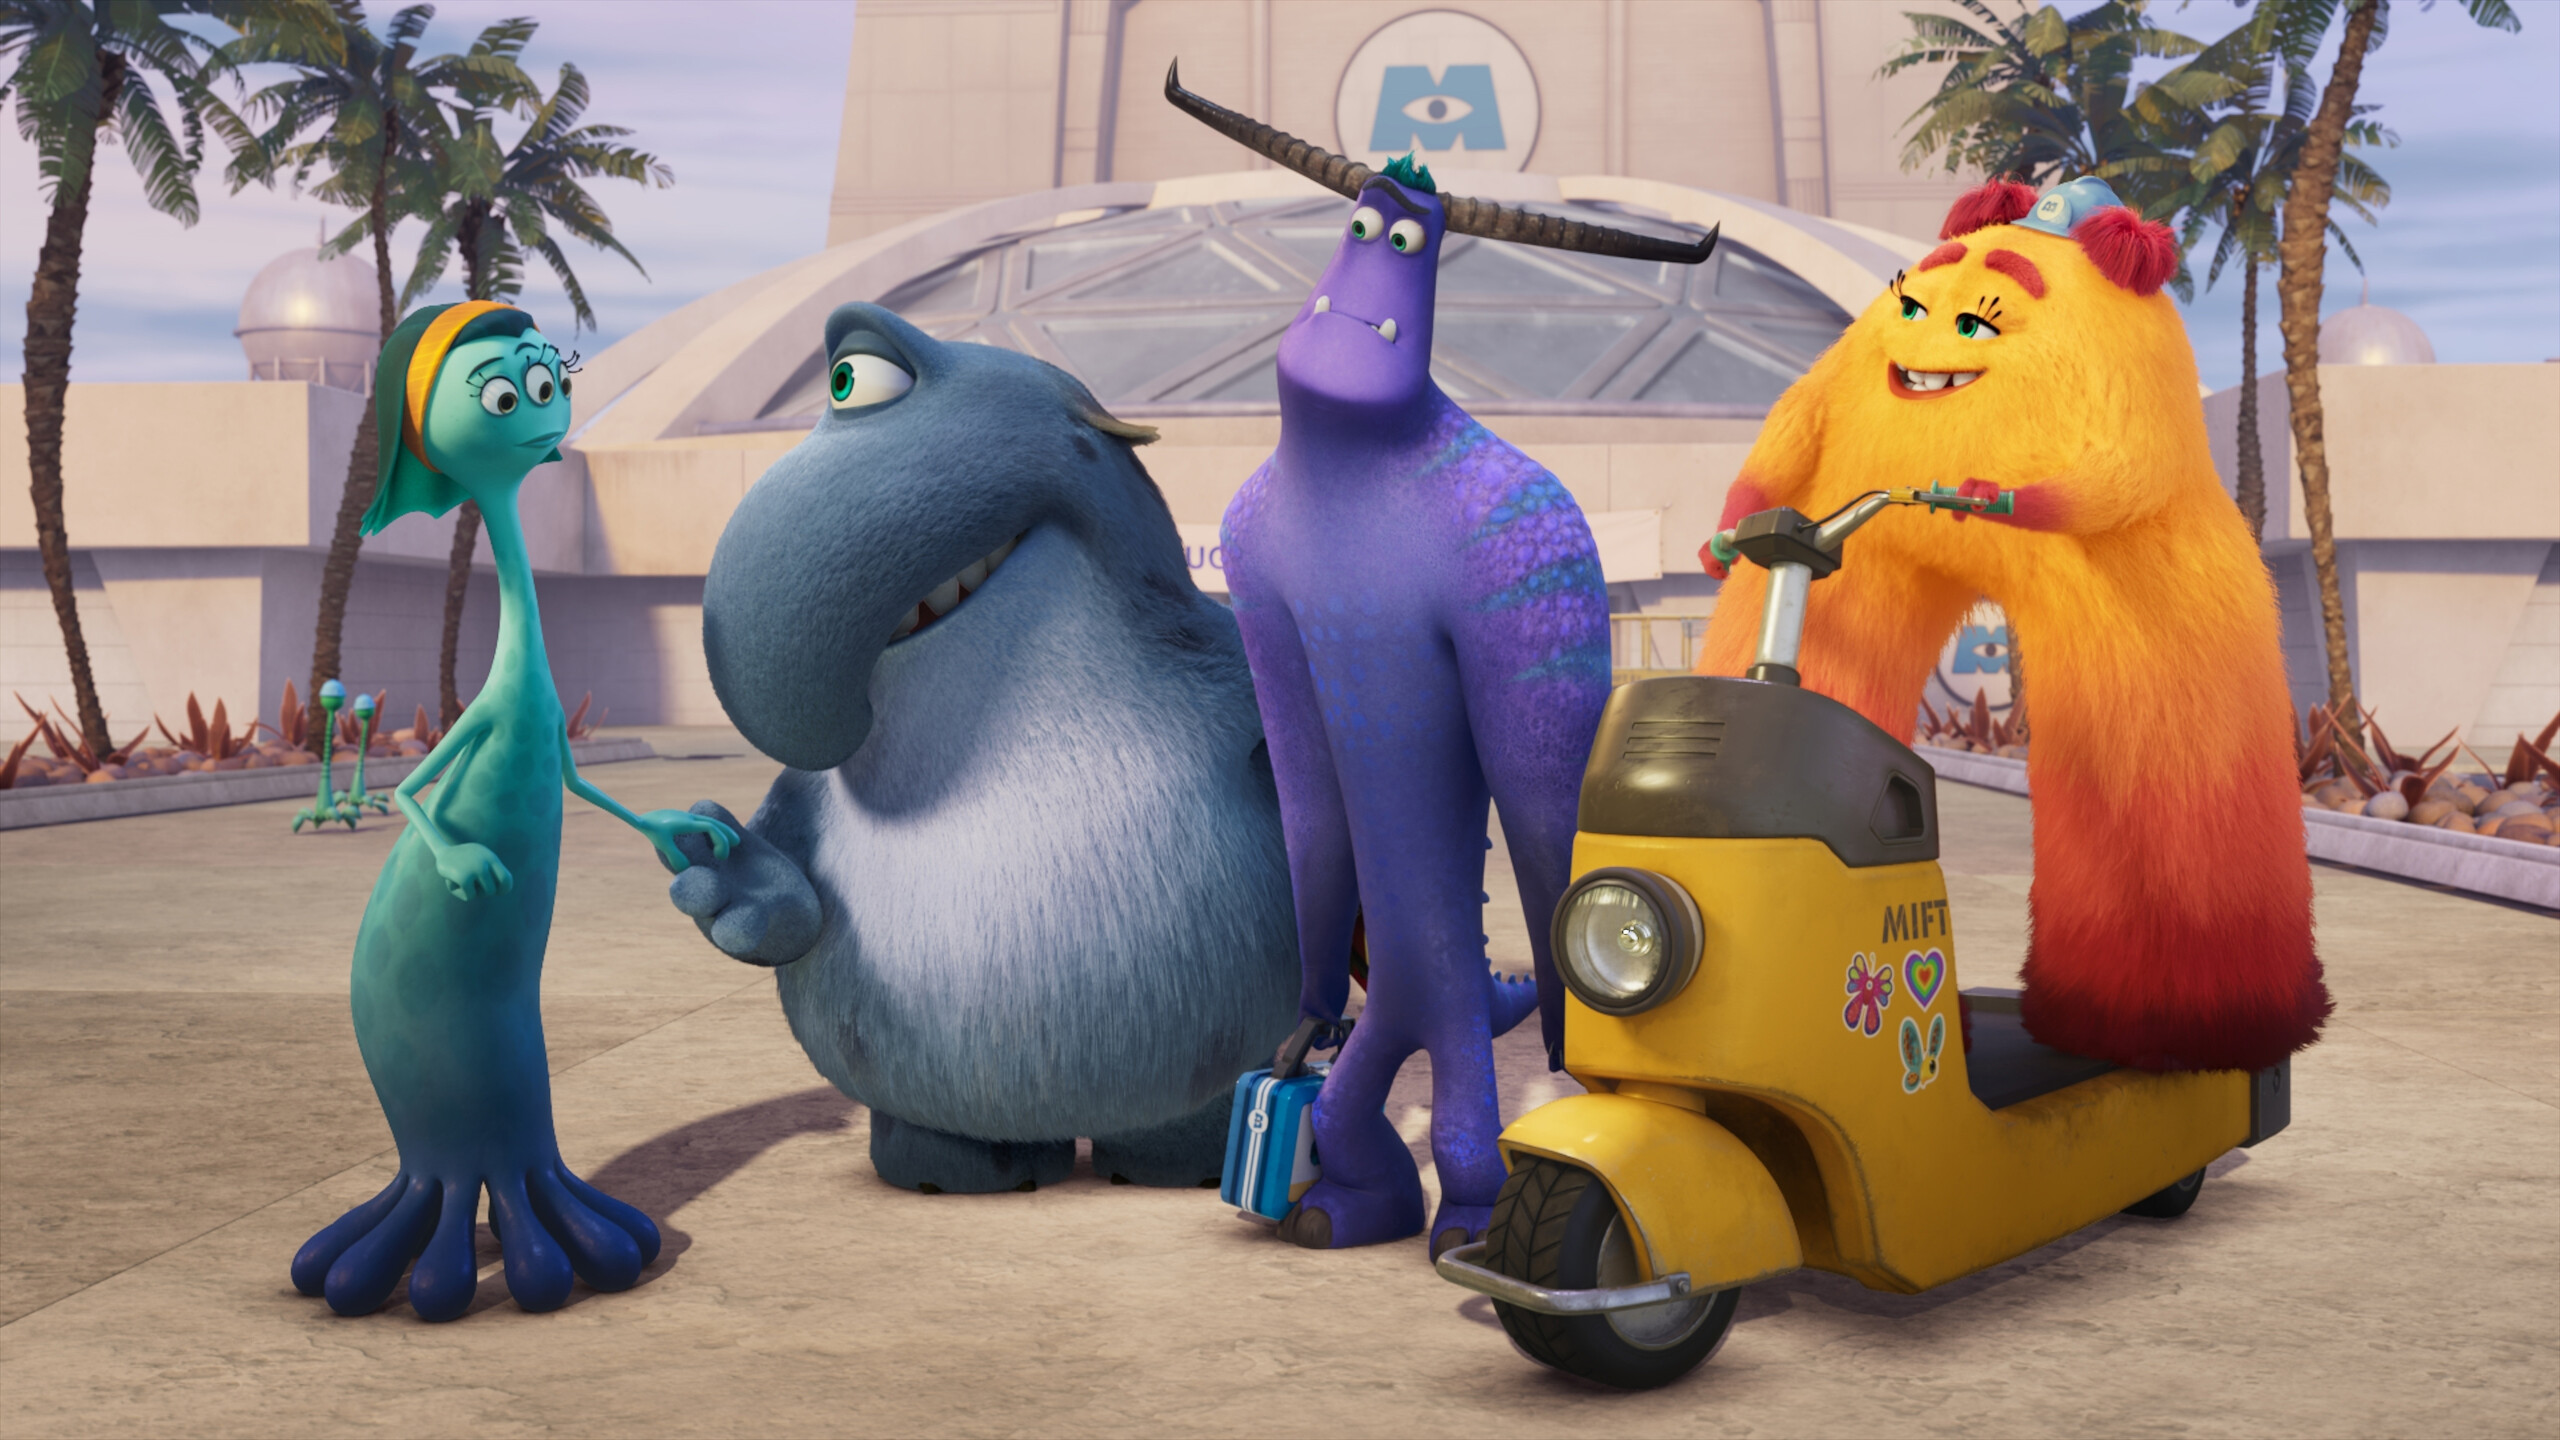 Monsters at Work: Series debuted on Disney+ on July 7, 2021, as part of the Monsters, Inc. media franchise. 2560x1440 HD Background.